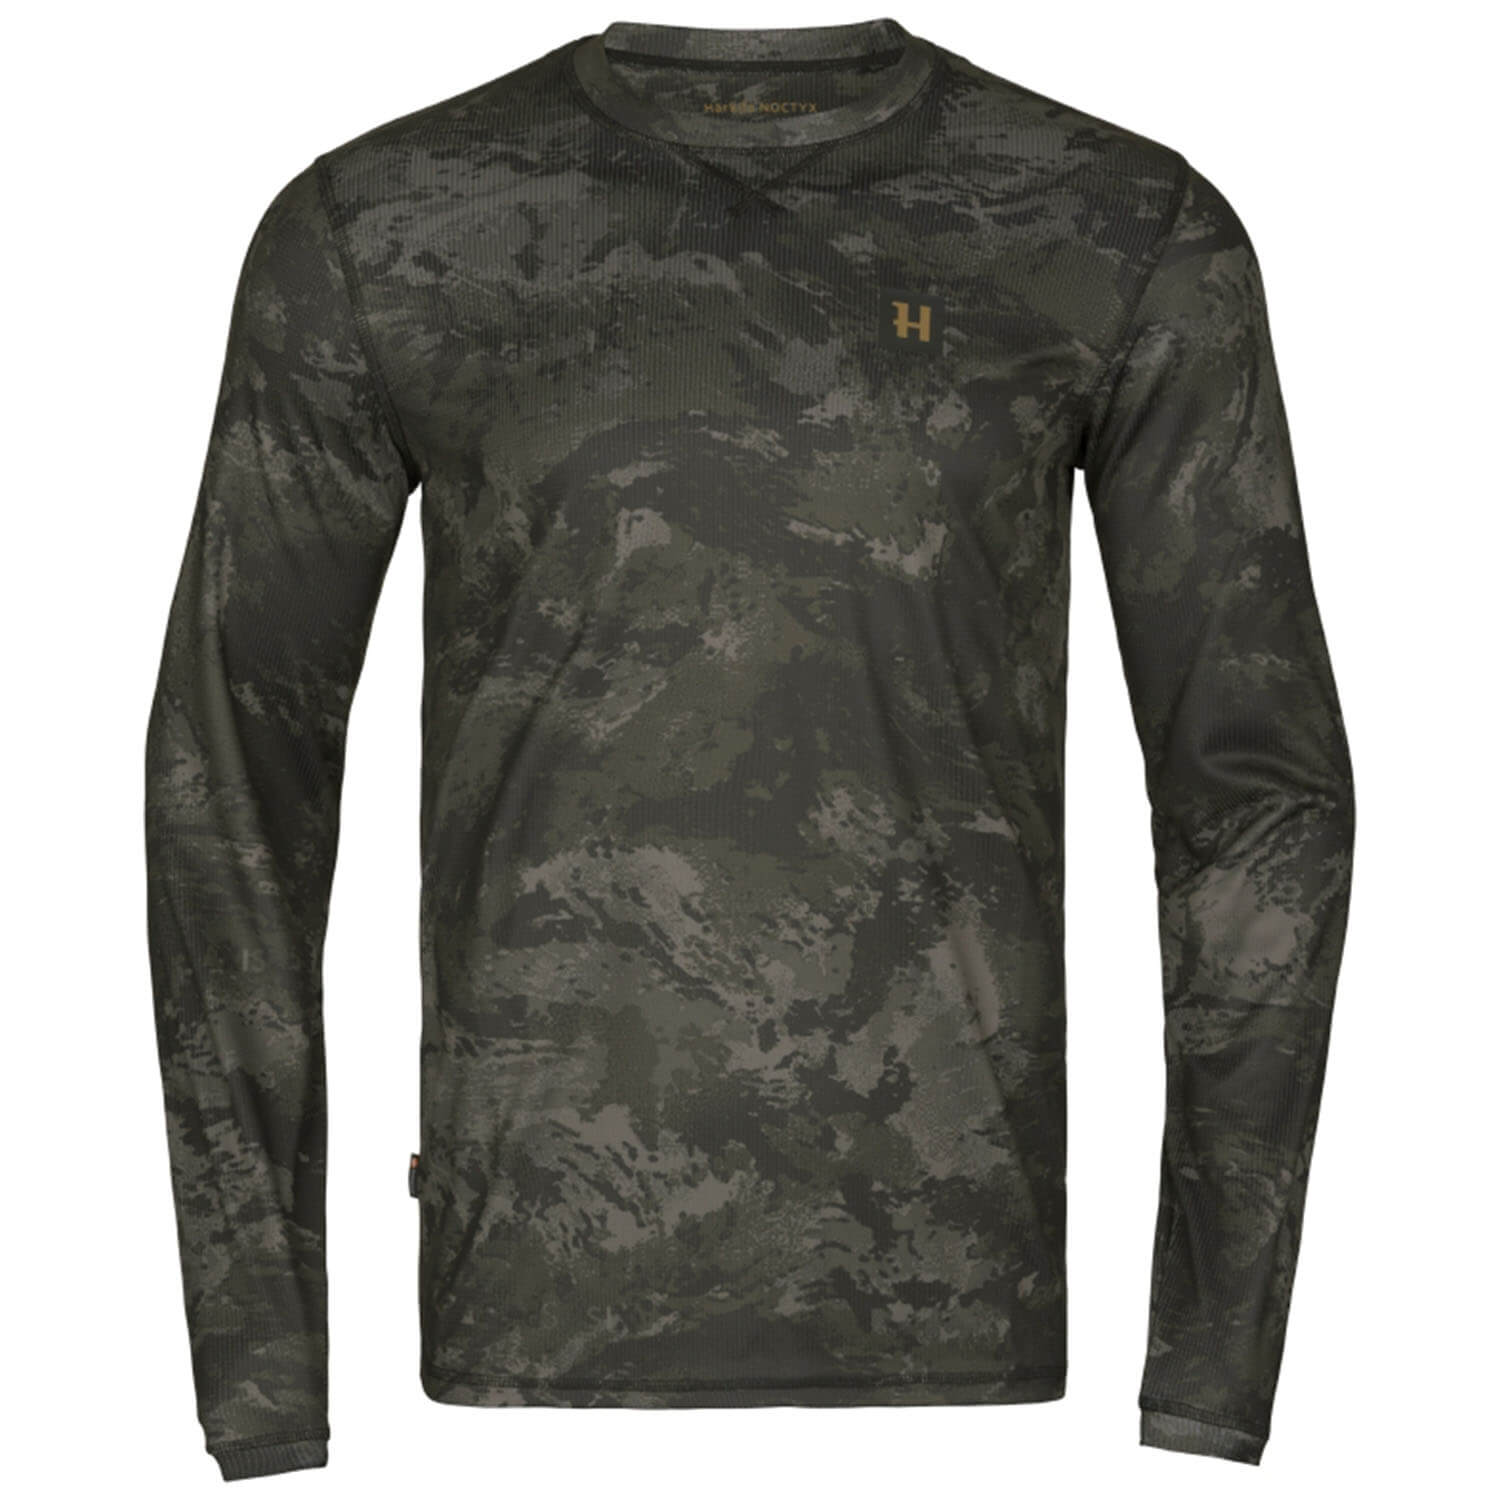  Härkila Noctyx long-sleeved shirt (AXIS MSP Black) - Camouflage Shirts